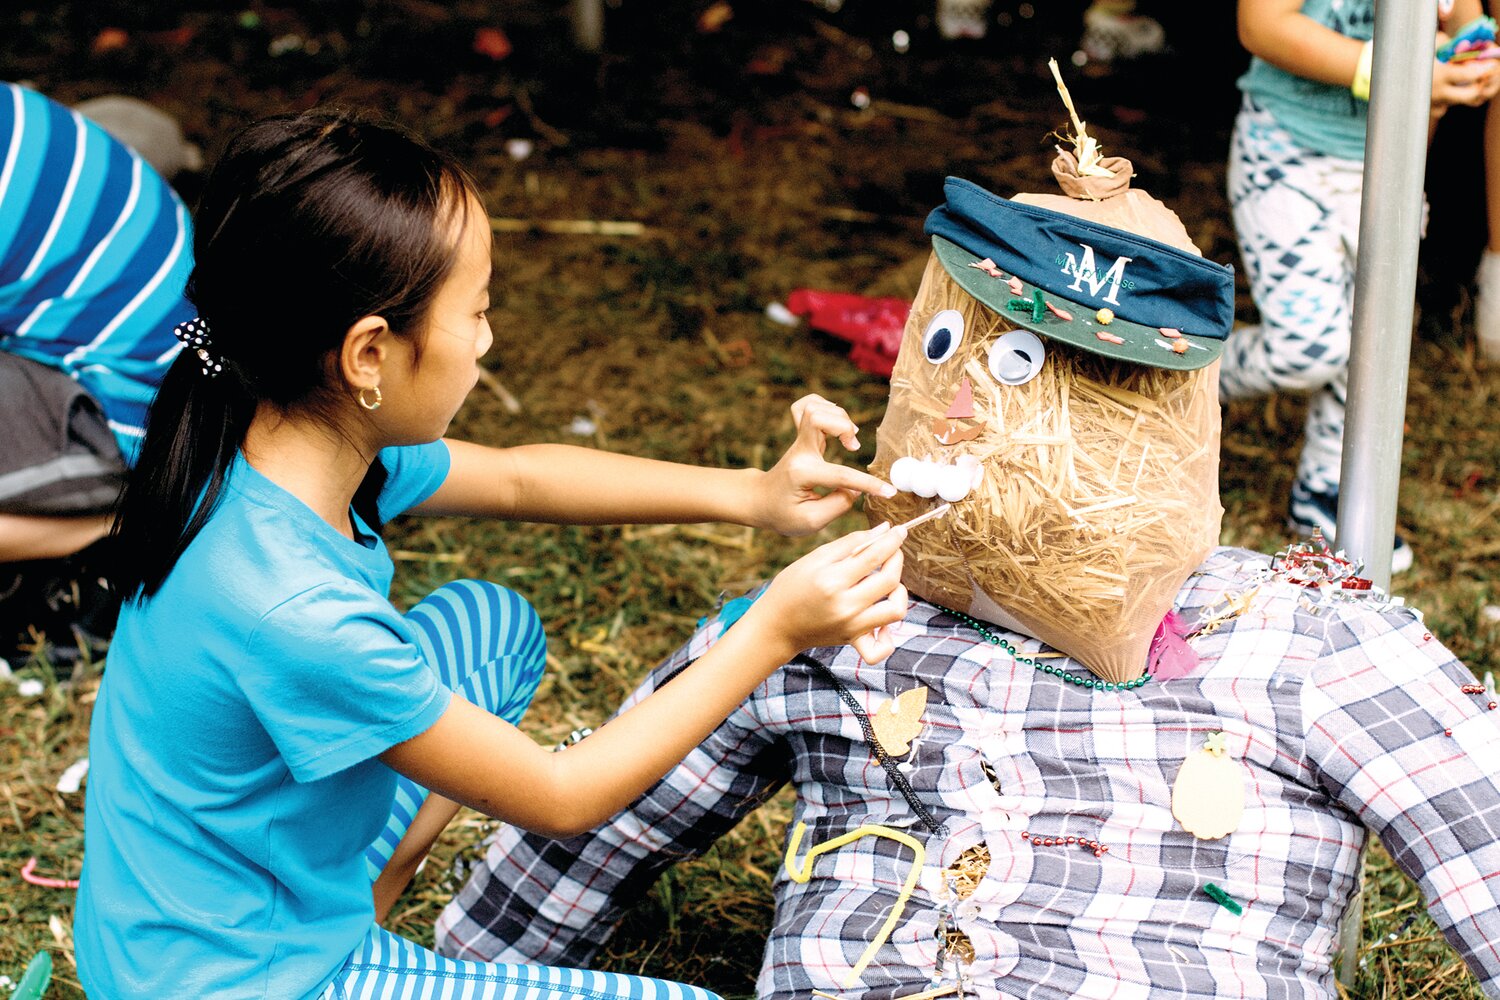 Scarecrow-making workshops will once again be offered at Peddler’s Village during “Scarecrow Season.”